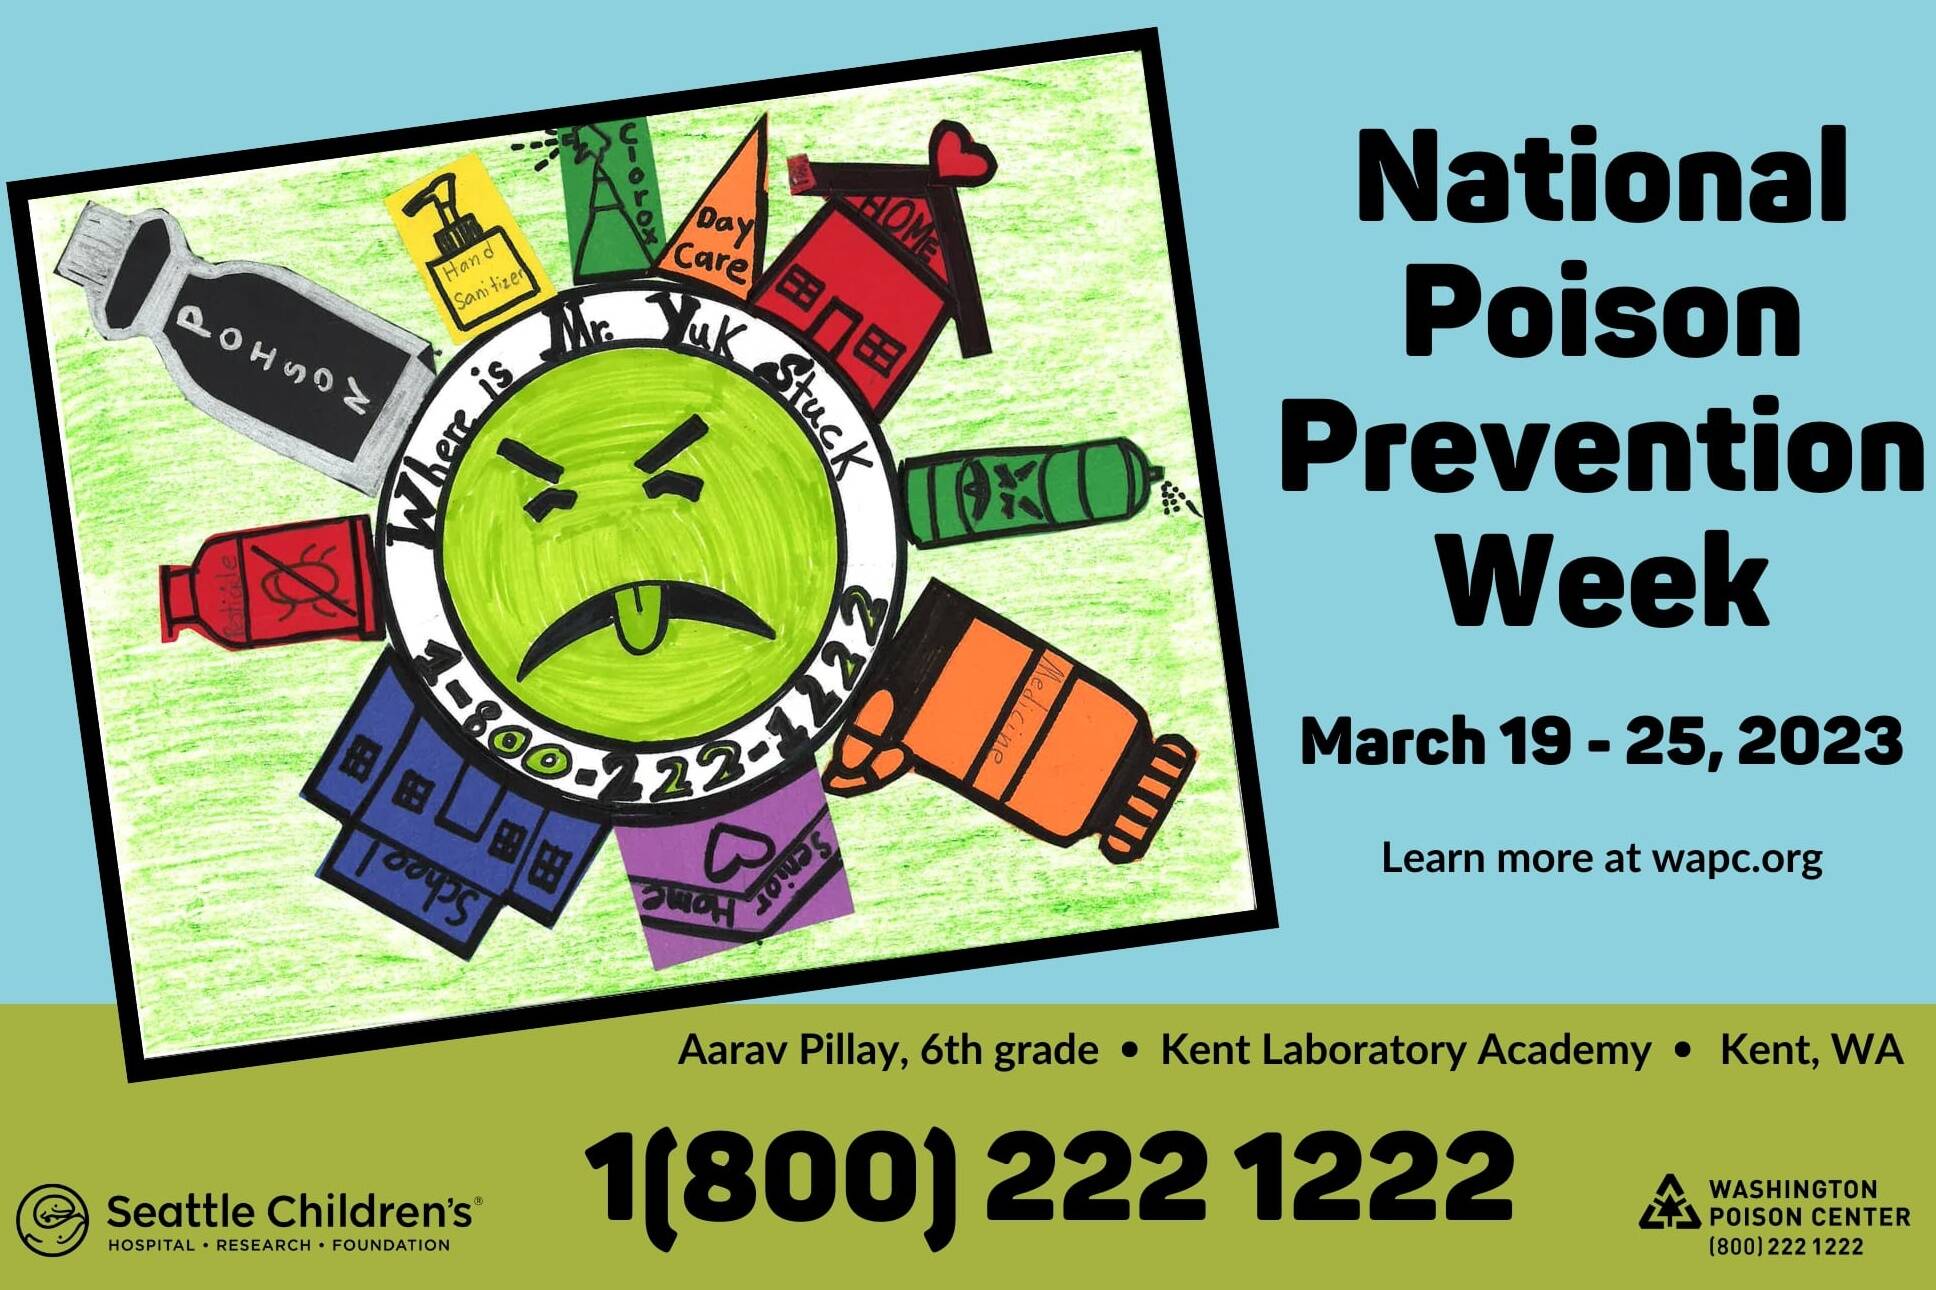 Aarav Pillay, a sixth-grader at Kent Laboratory Academy, drew this winner poster for the Washington Poison Center. Courtesy image